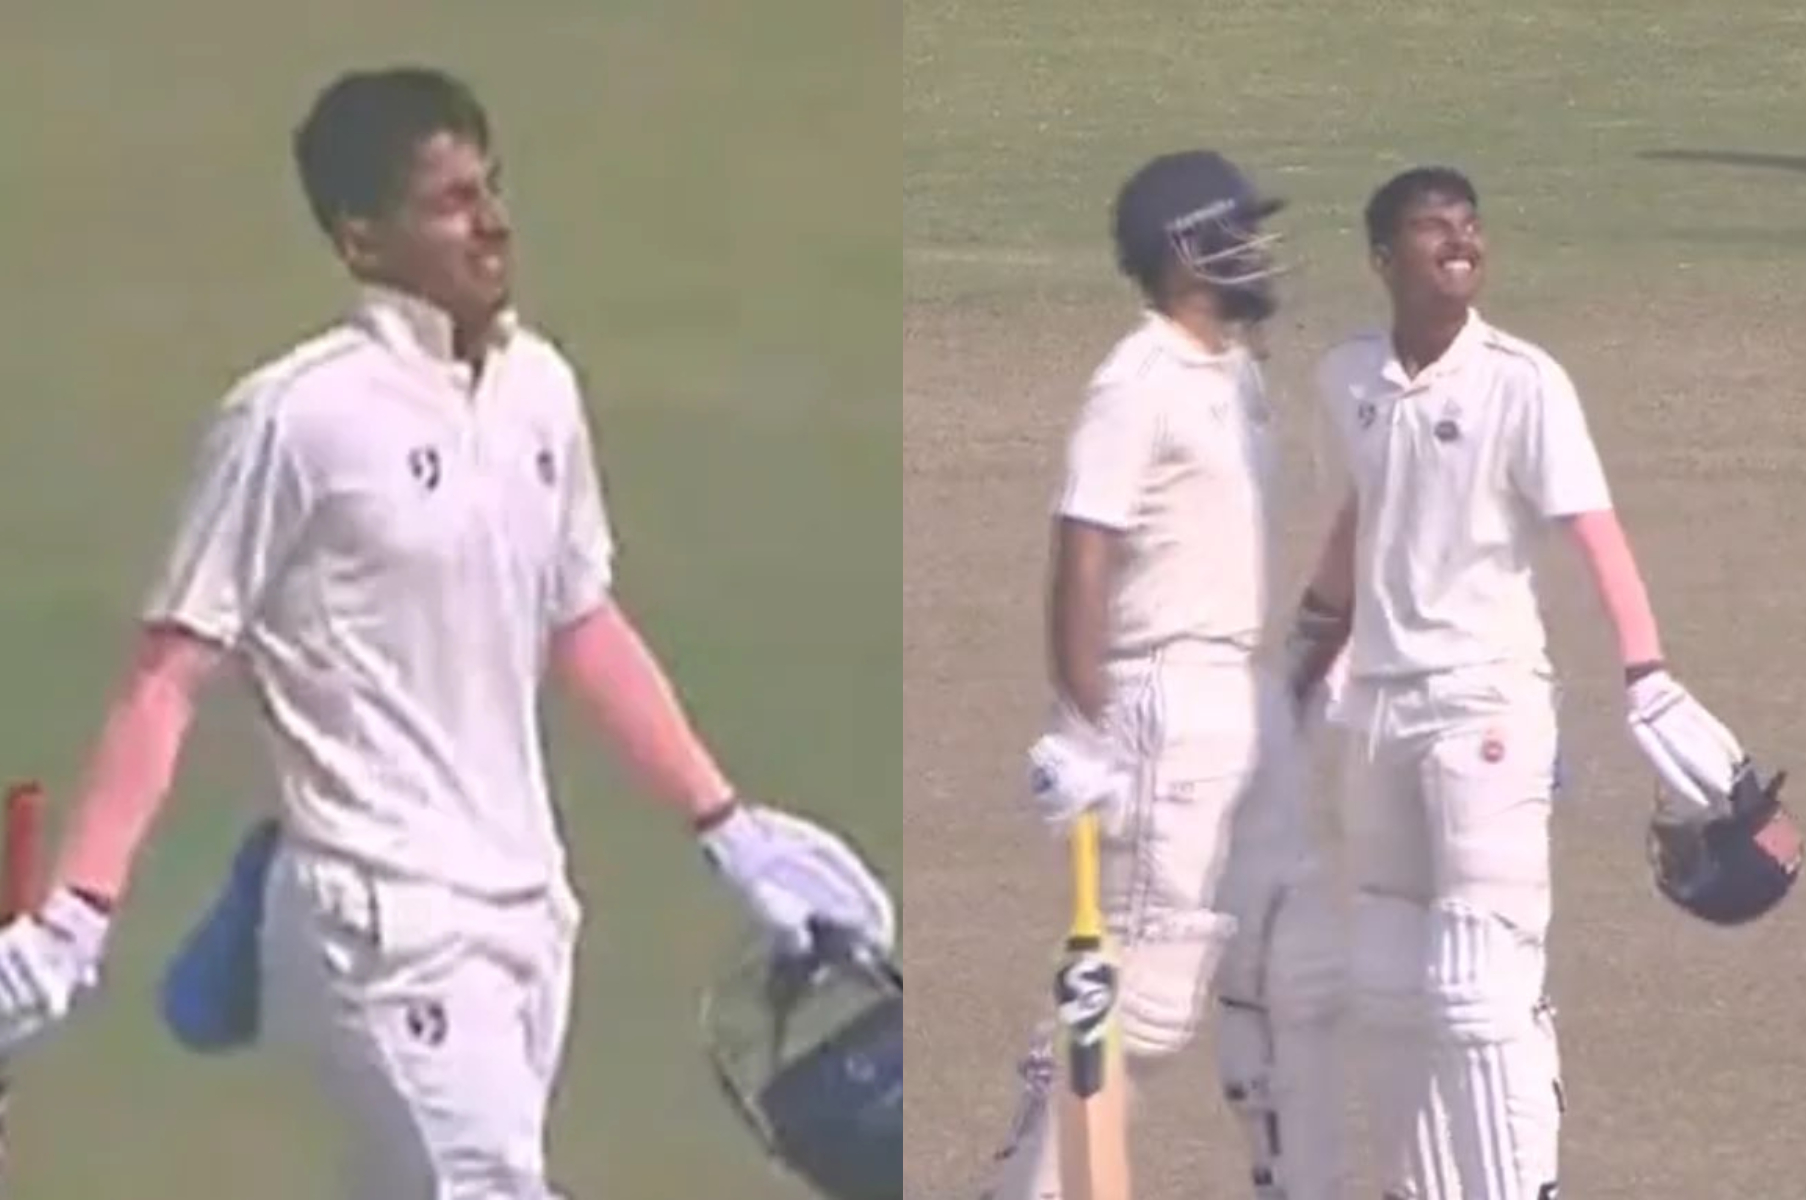 Dhull made 113 and 113* in the two innings for Delhi in his debut Ranji match against TN | Twitter